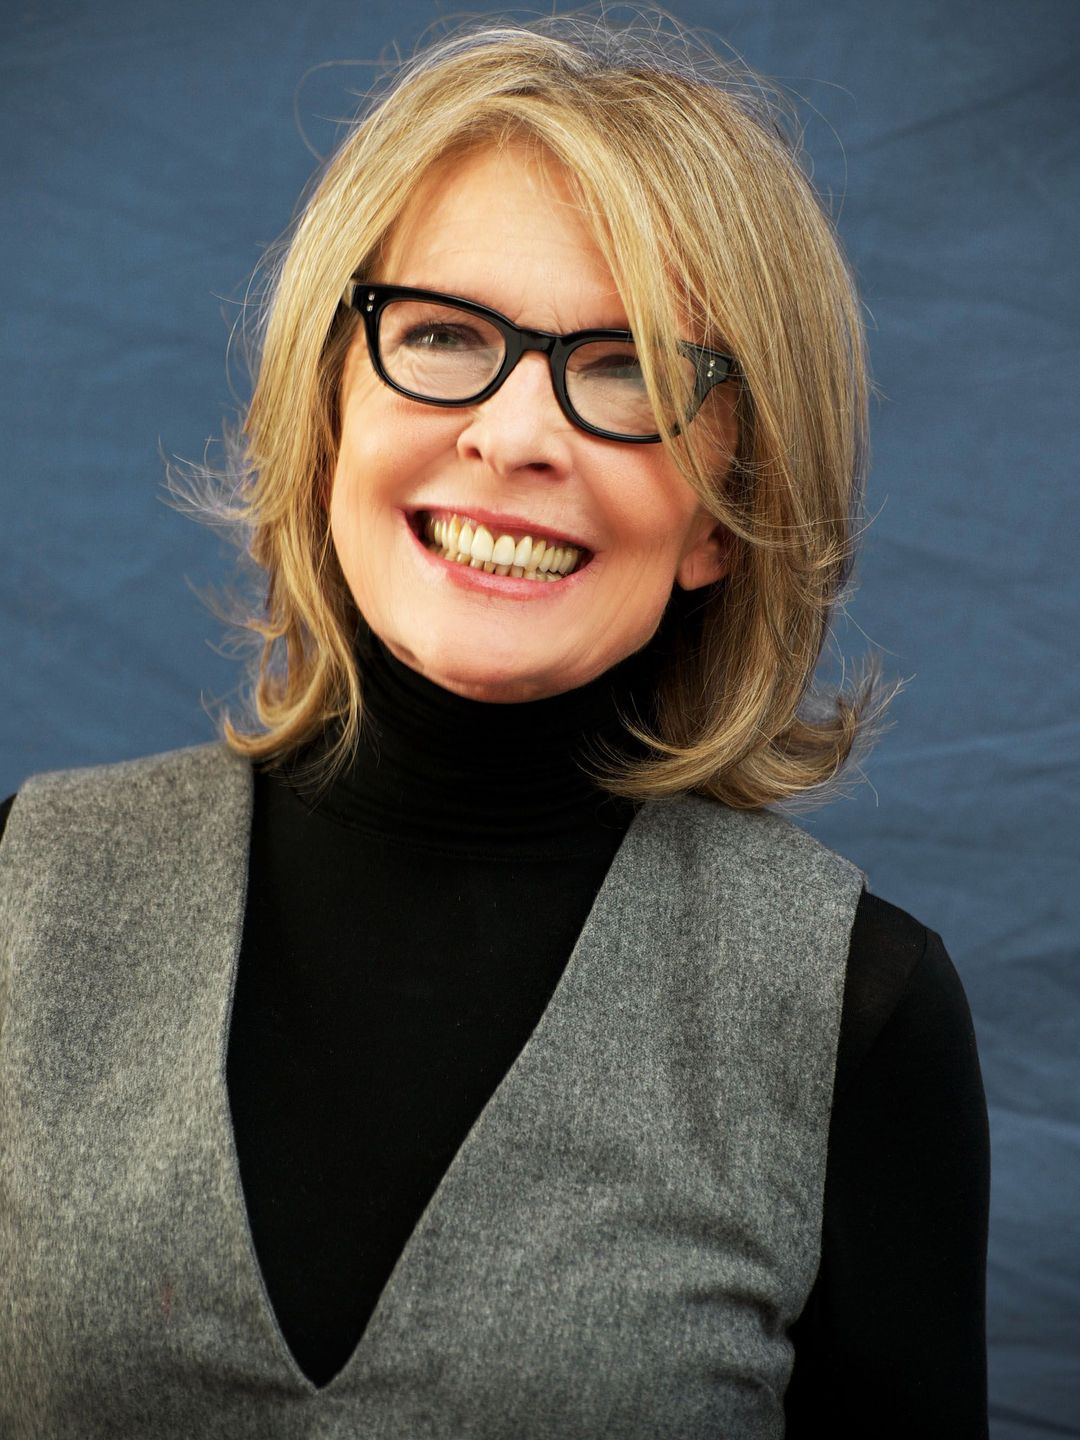 Diane Keaton how old is she